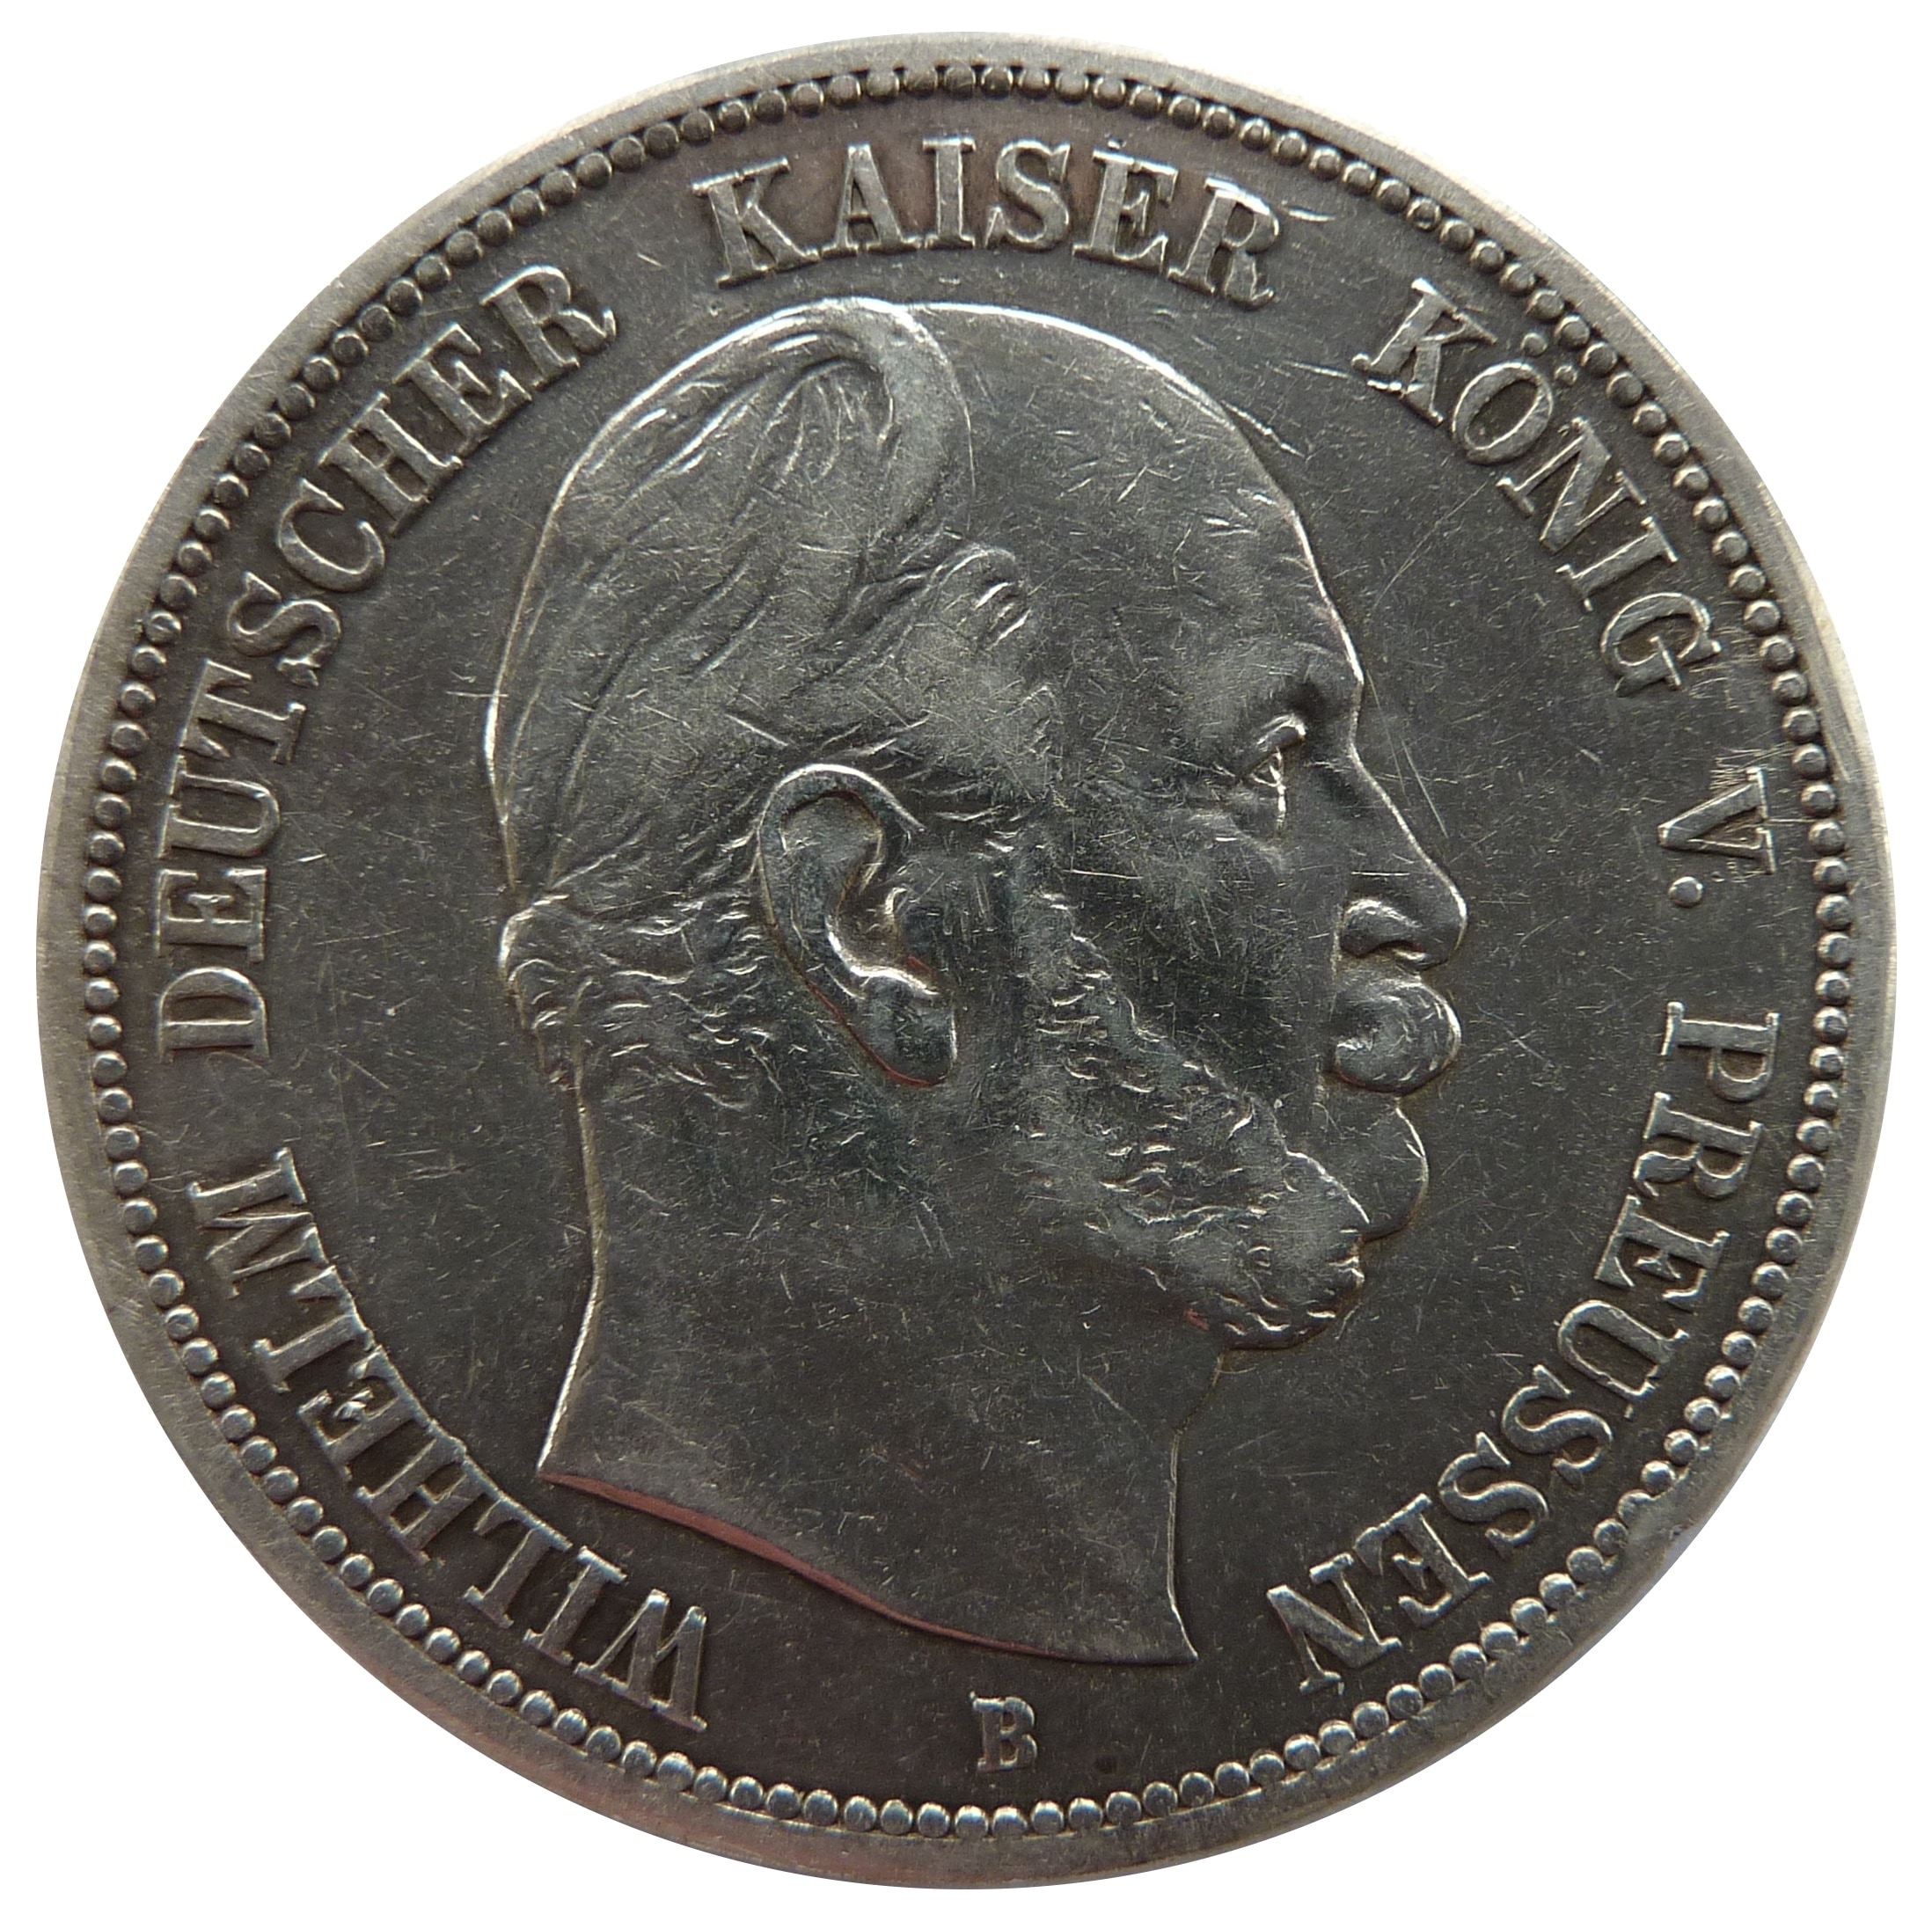 Mark, Currency, Prussia, Coin, Wilhelm, finance, coin